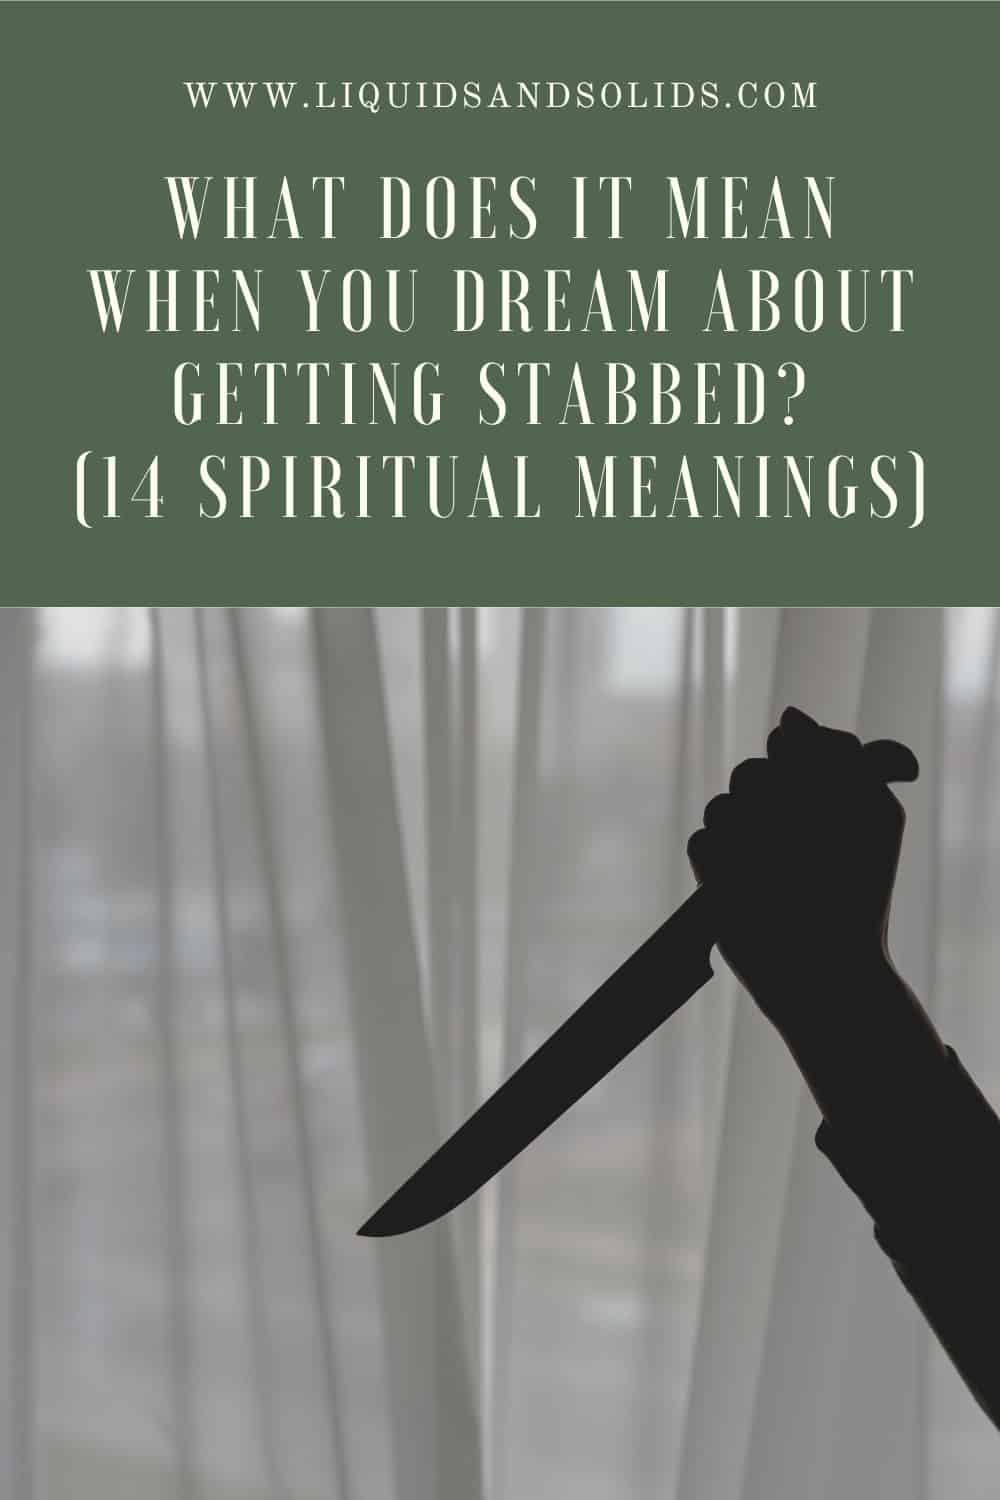 What Does it Mean When You Dream About Getting Stabbed?